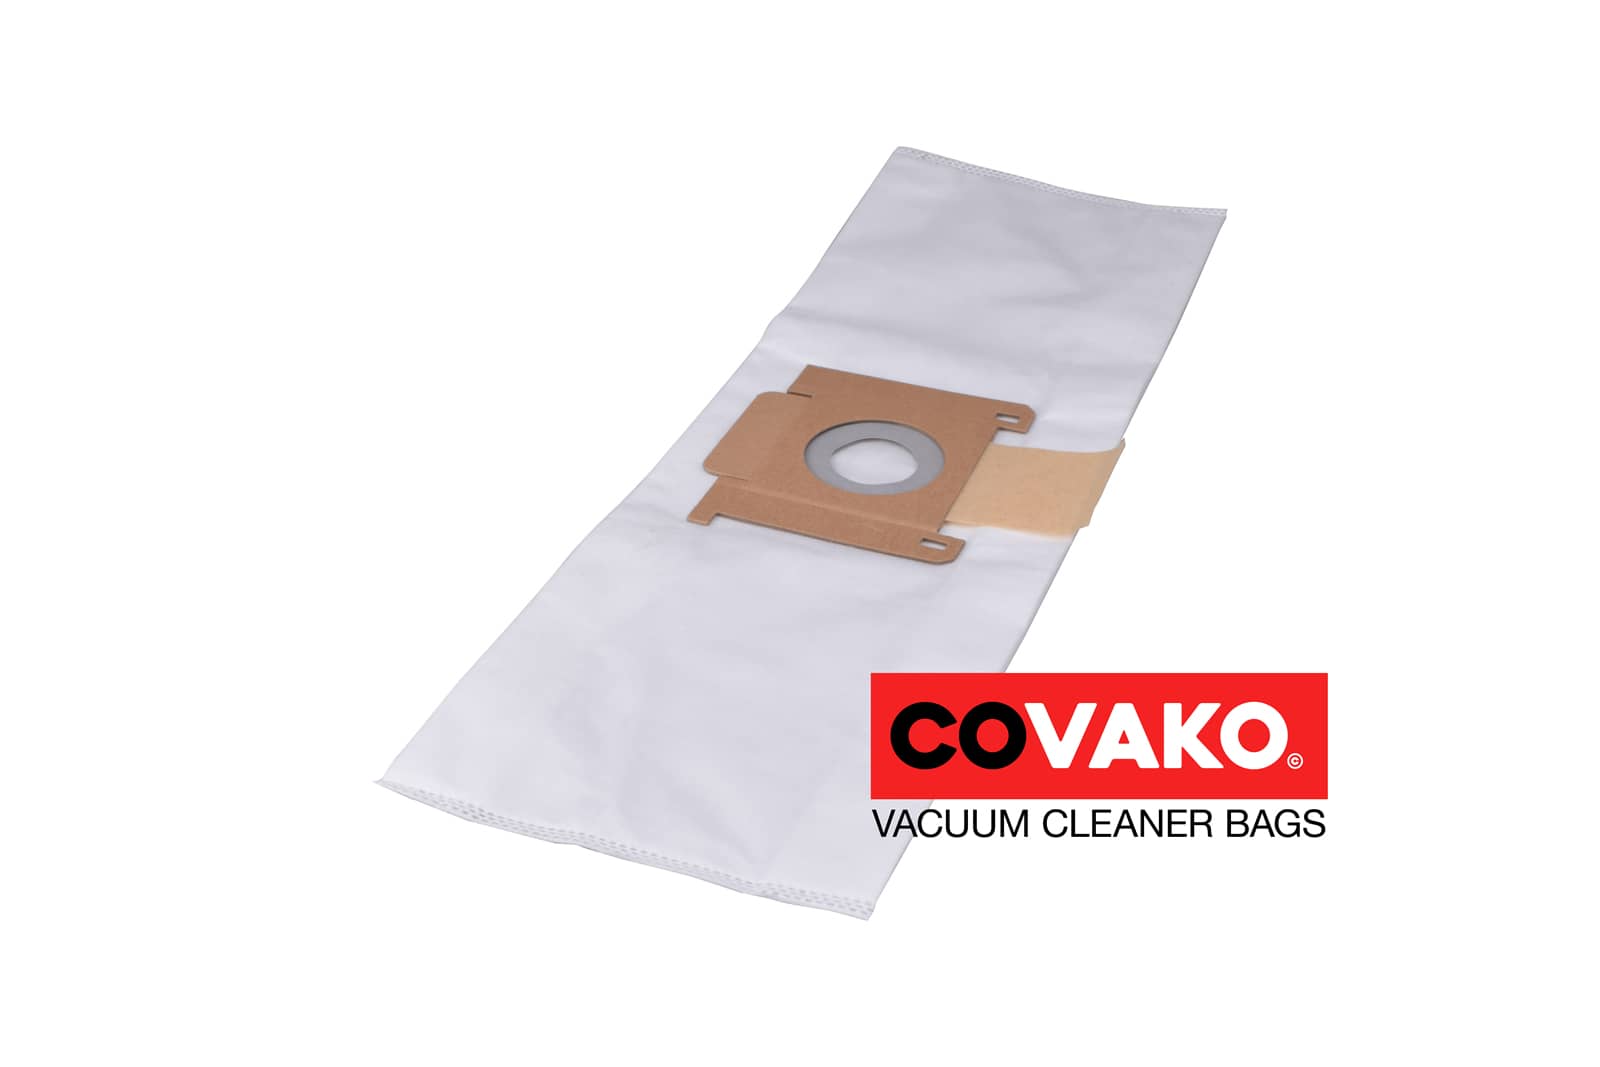 Ivac K100220094830 / Synthesis - Ivac vacuum cleaner bags